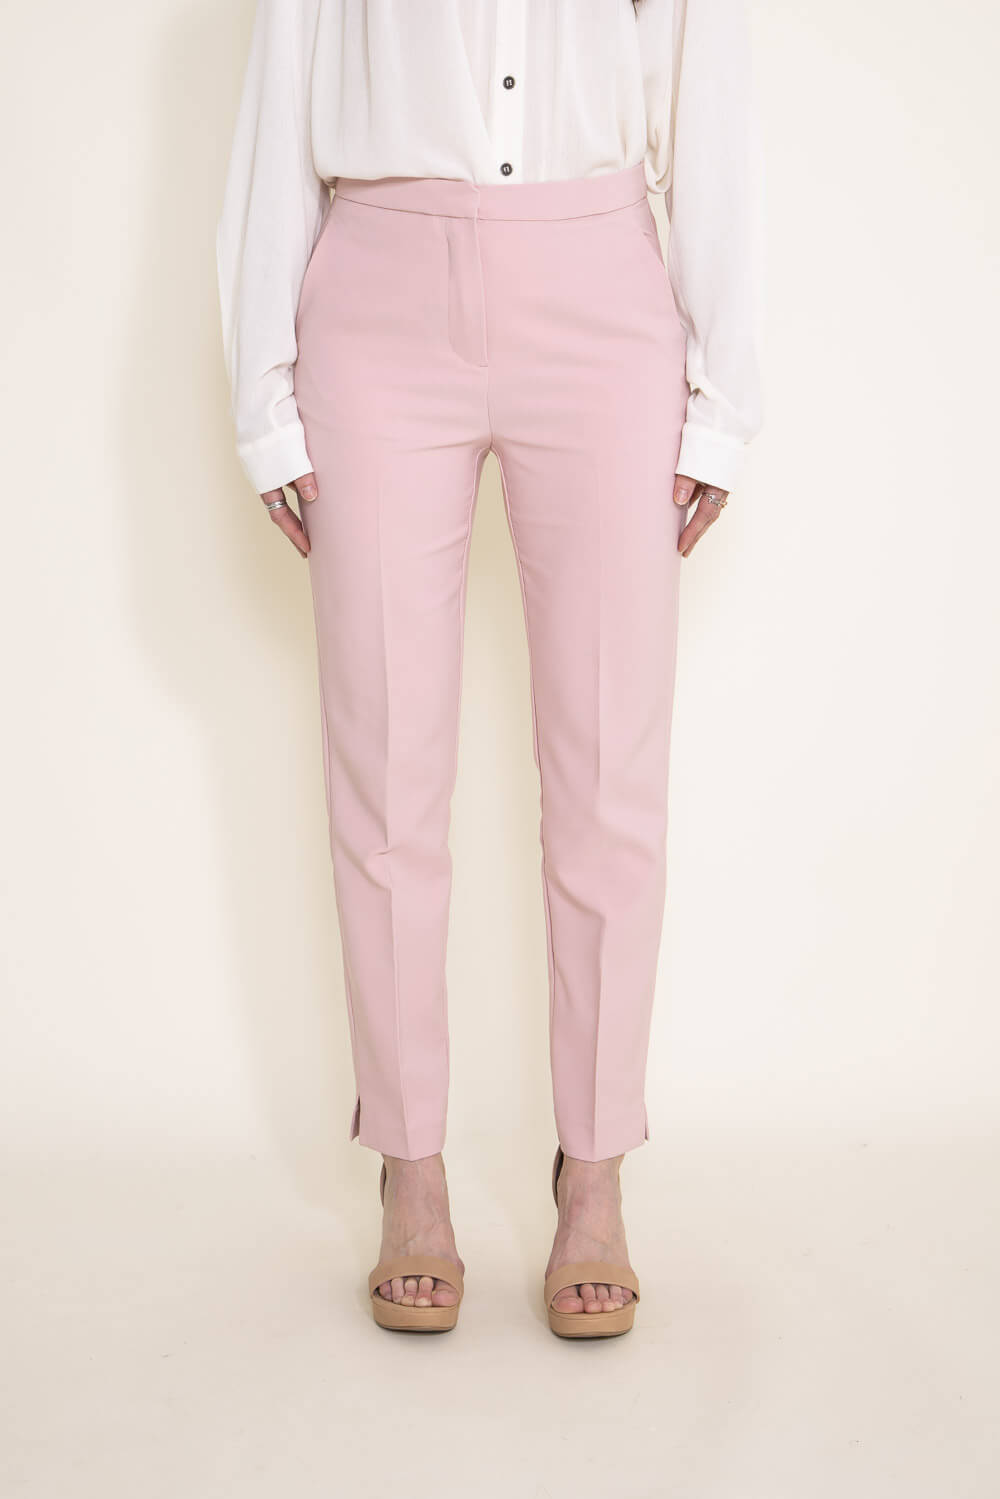  Pink - Women's Pants / Women's Clothing: Clothing, Shoes &  Accessories